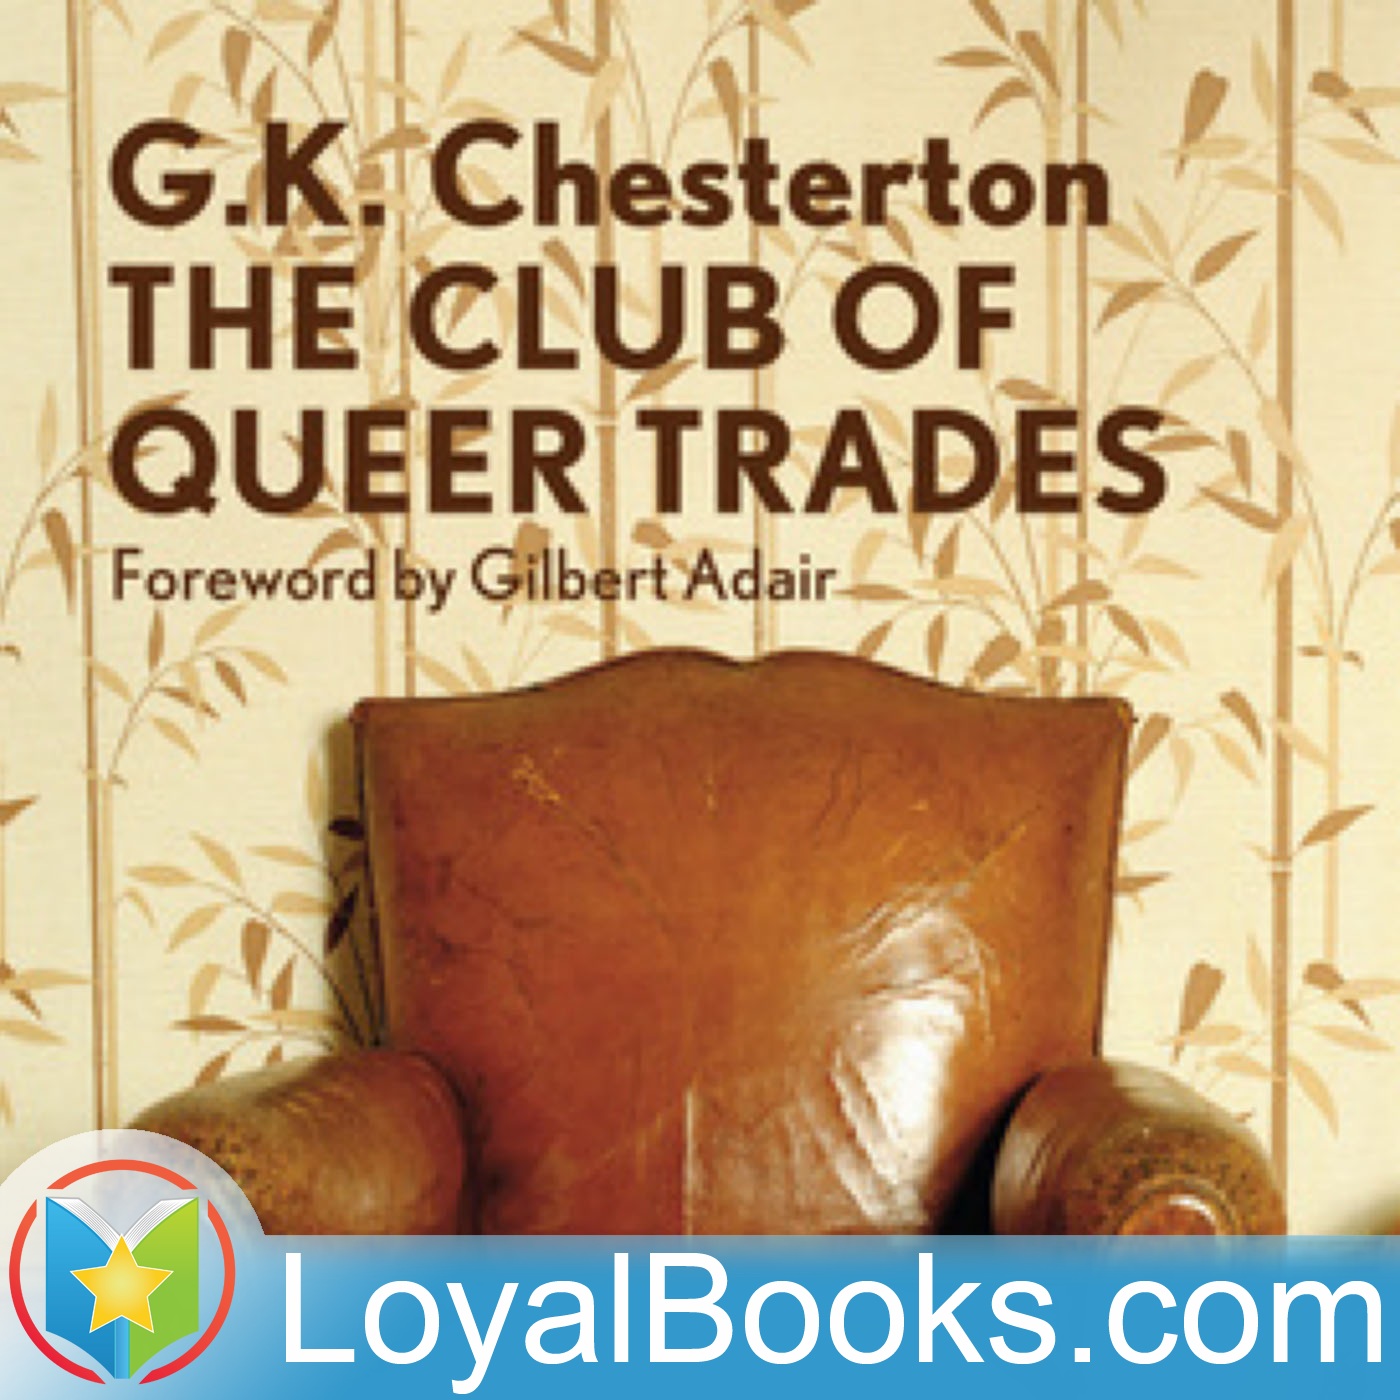 The Club of Queer Trades by G. K. Chesterton